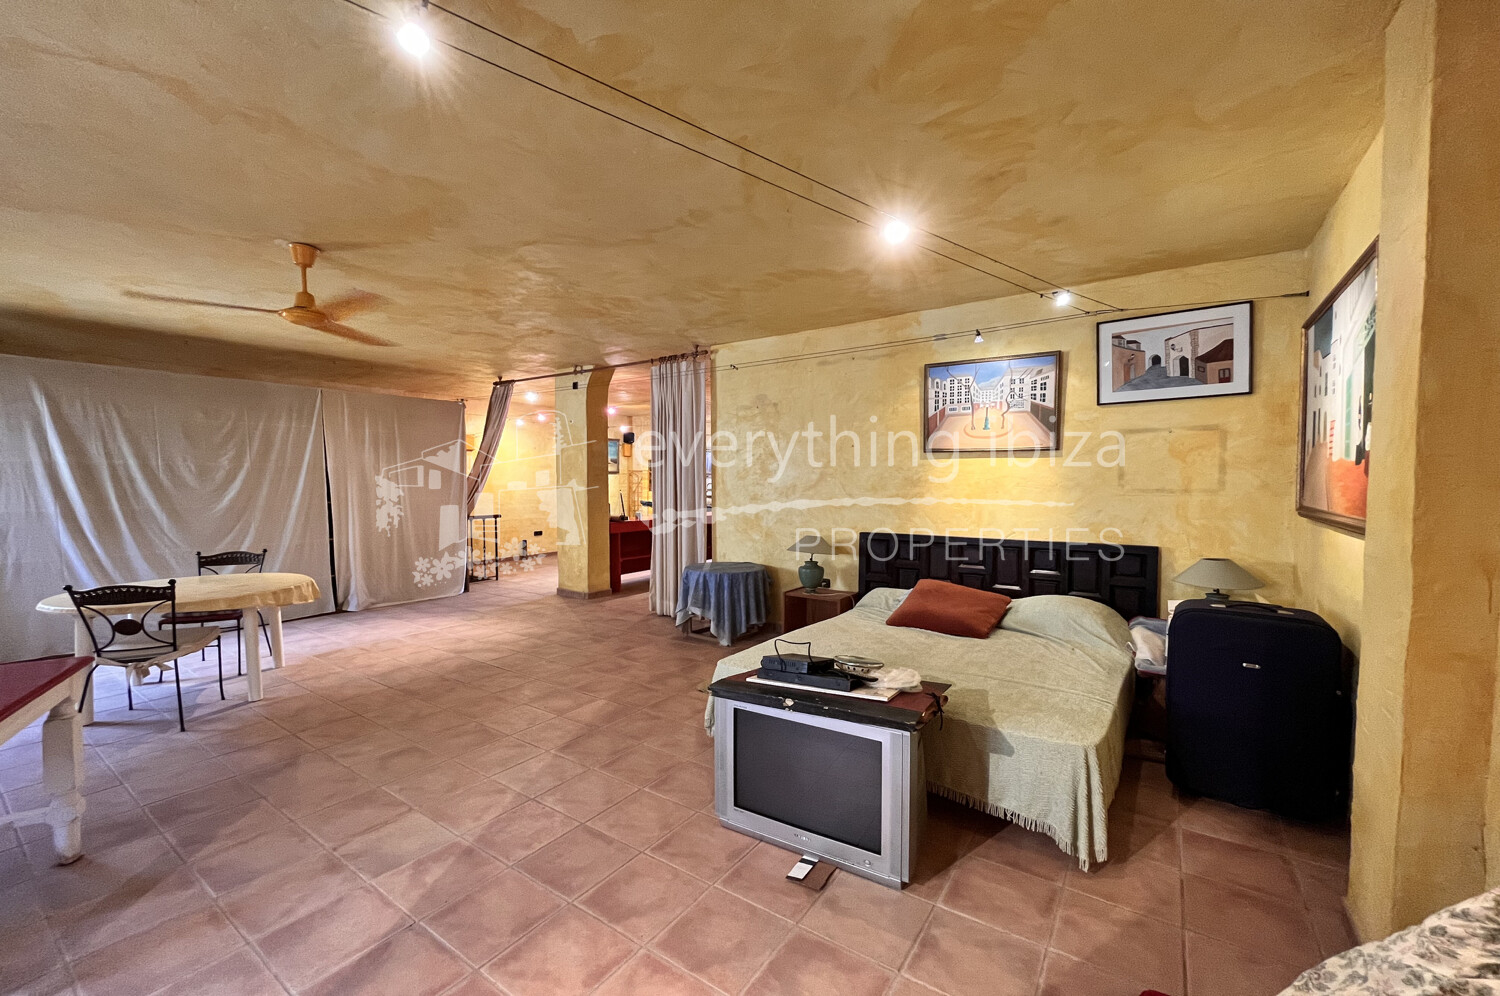 https://www.everythingibiza.com/properties/versatile-commer…of-san-jose-1640/,ref. 27 for sale in Ibiza by everything ibiza Properties